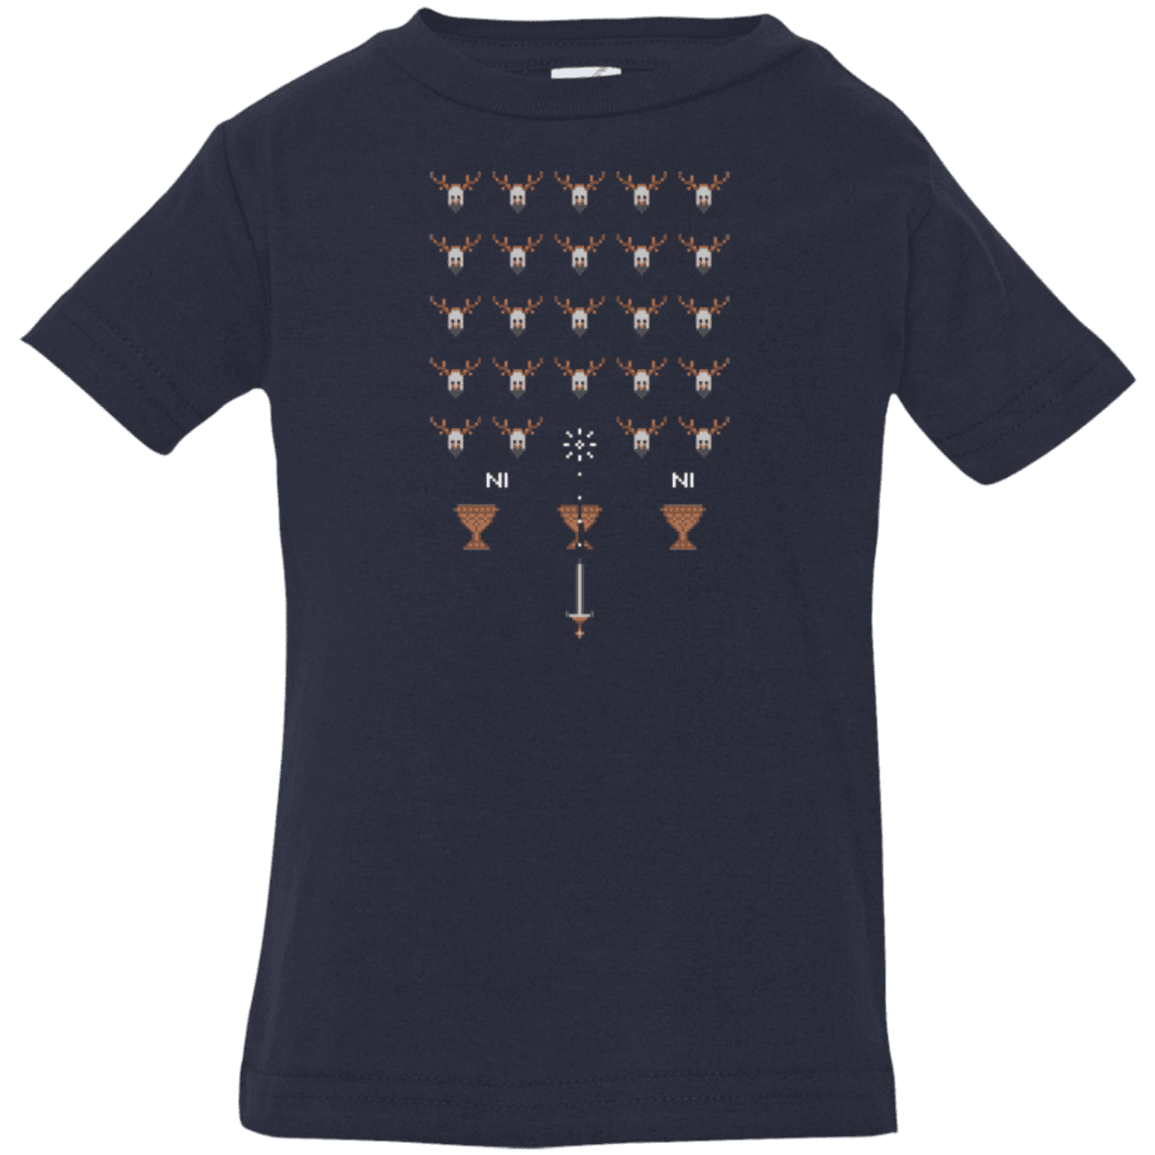 T-Shirts Navy / 6 Months Space NI Invaders Infant Premium T-Shirt